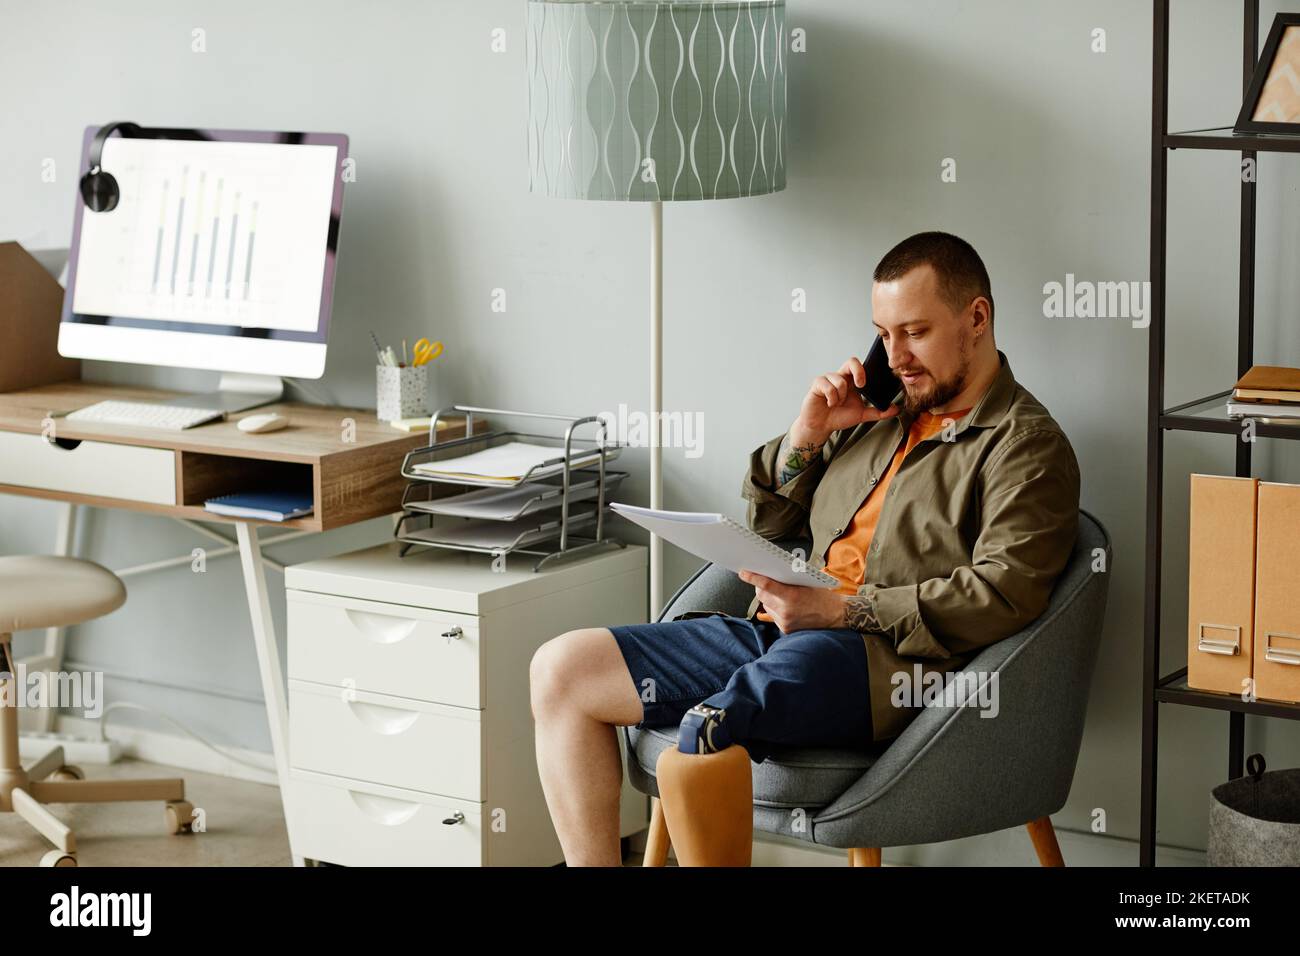 Portrait of man with prosthetic leg calling by phone while sitting in chair in home office interior, copy space Stock Photo